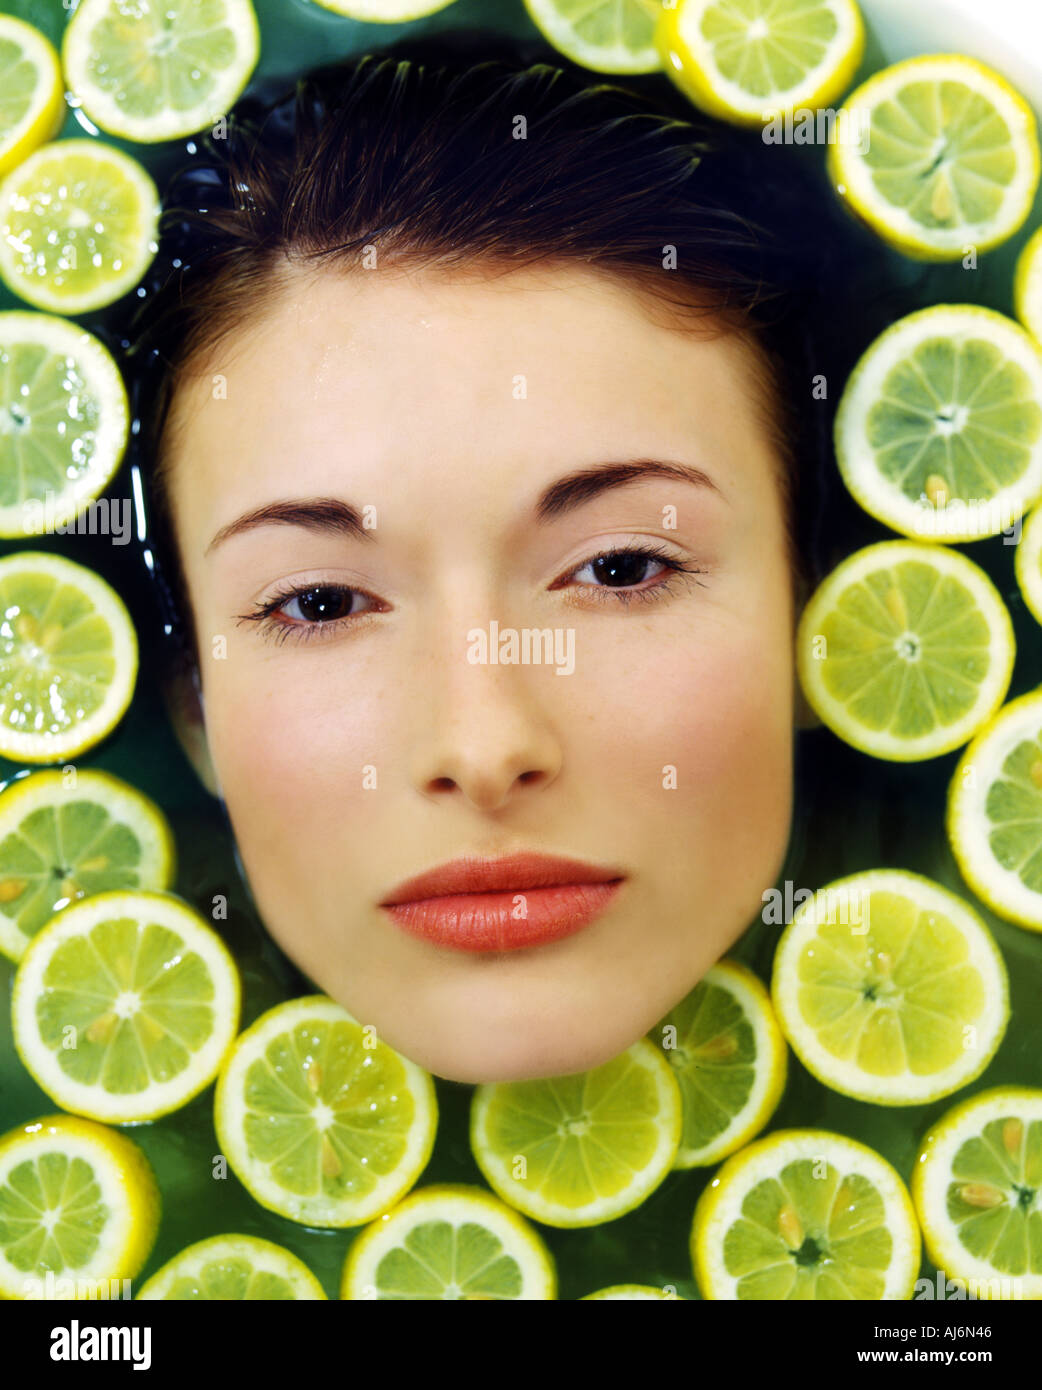 Woman taking bath with citrus slices. Stock Photo